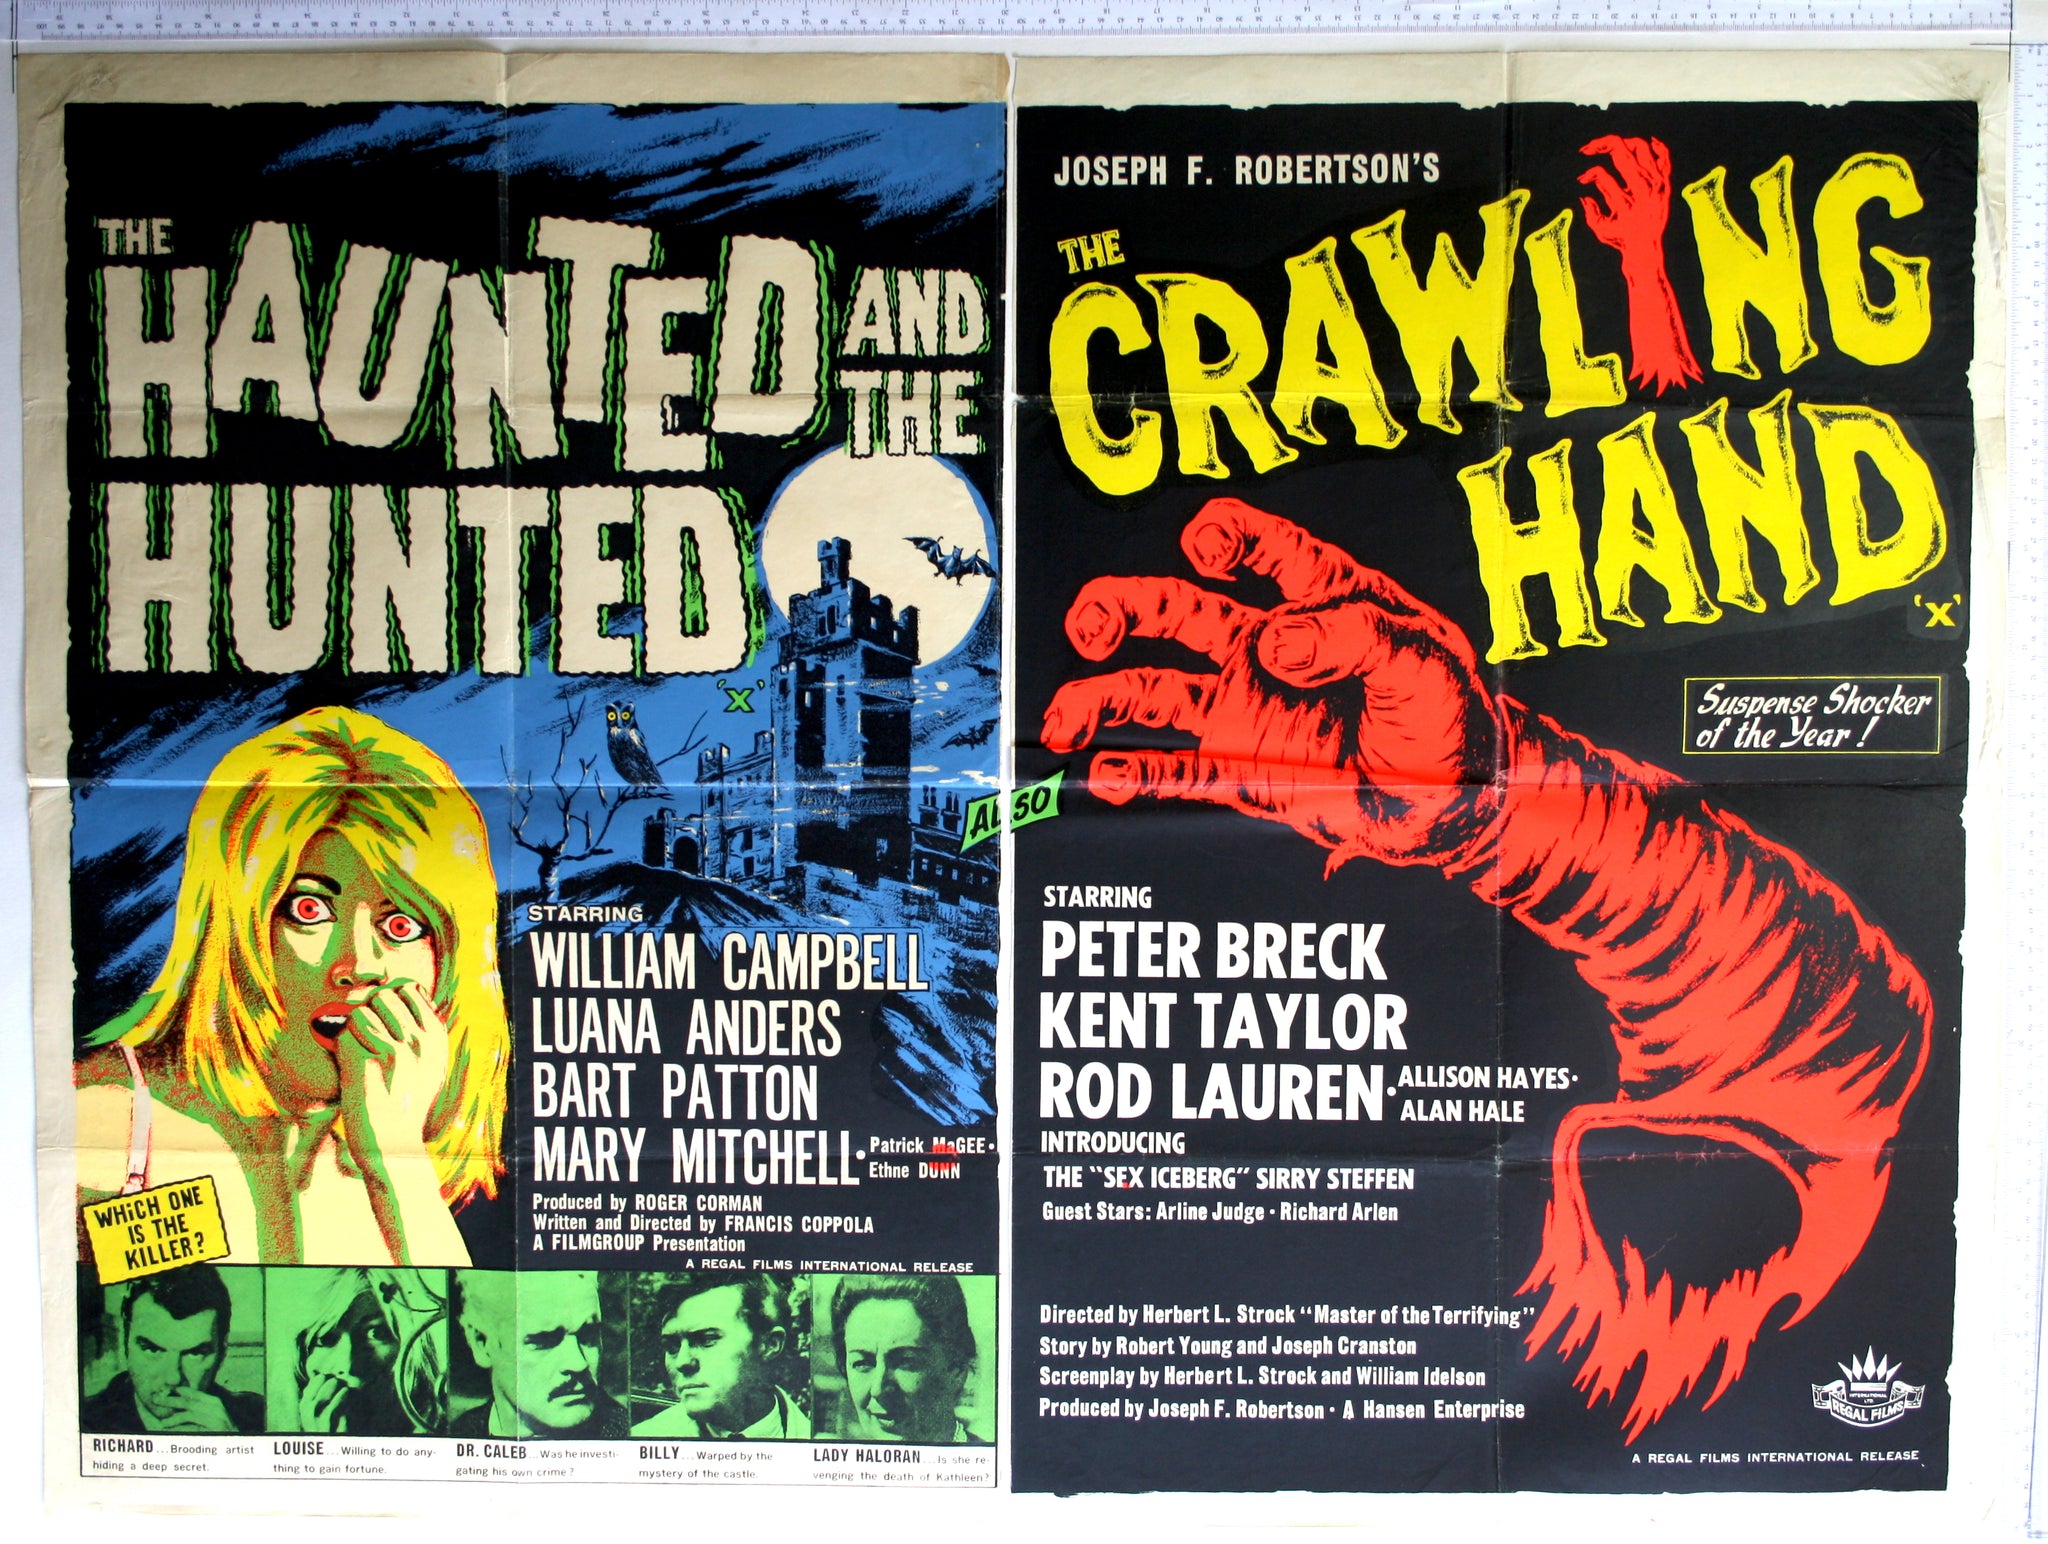 Green, yellow and red lithograph of frightened woman, castle at rear, green cast photos. On right, Red severed arm on black.